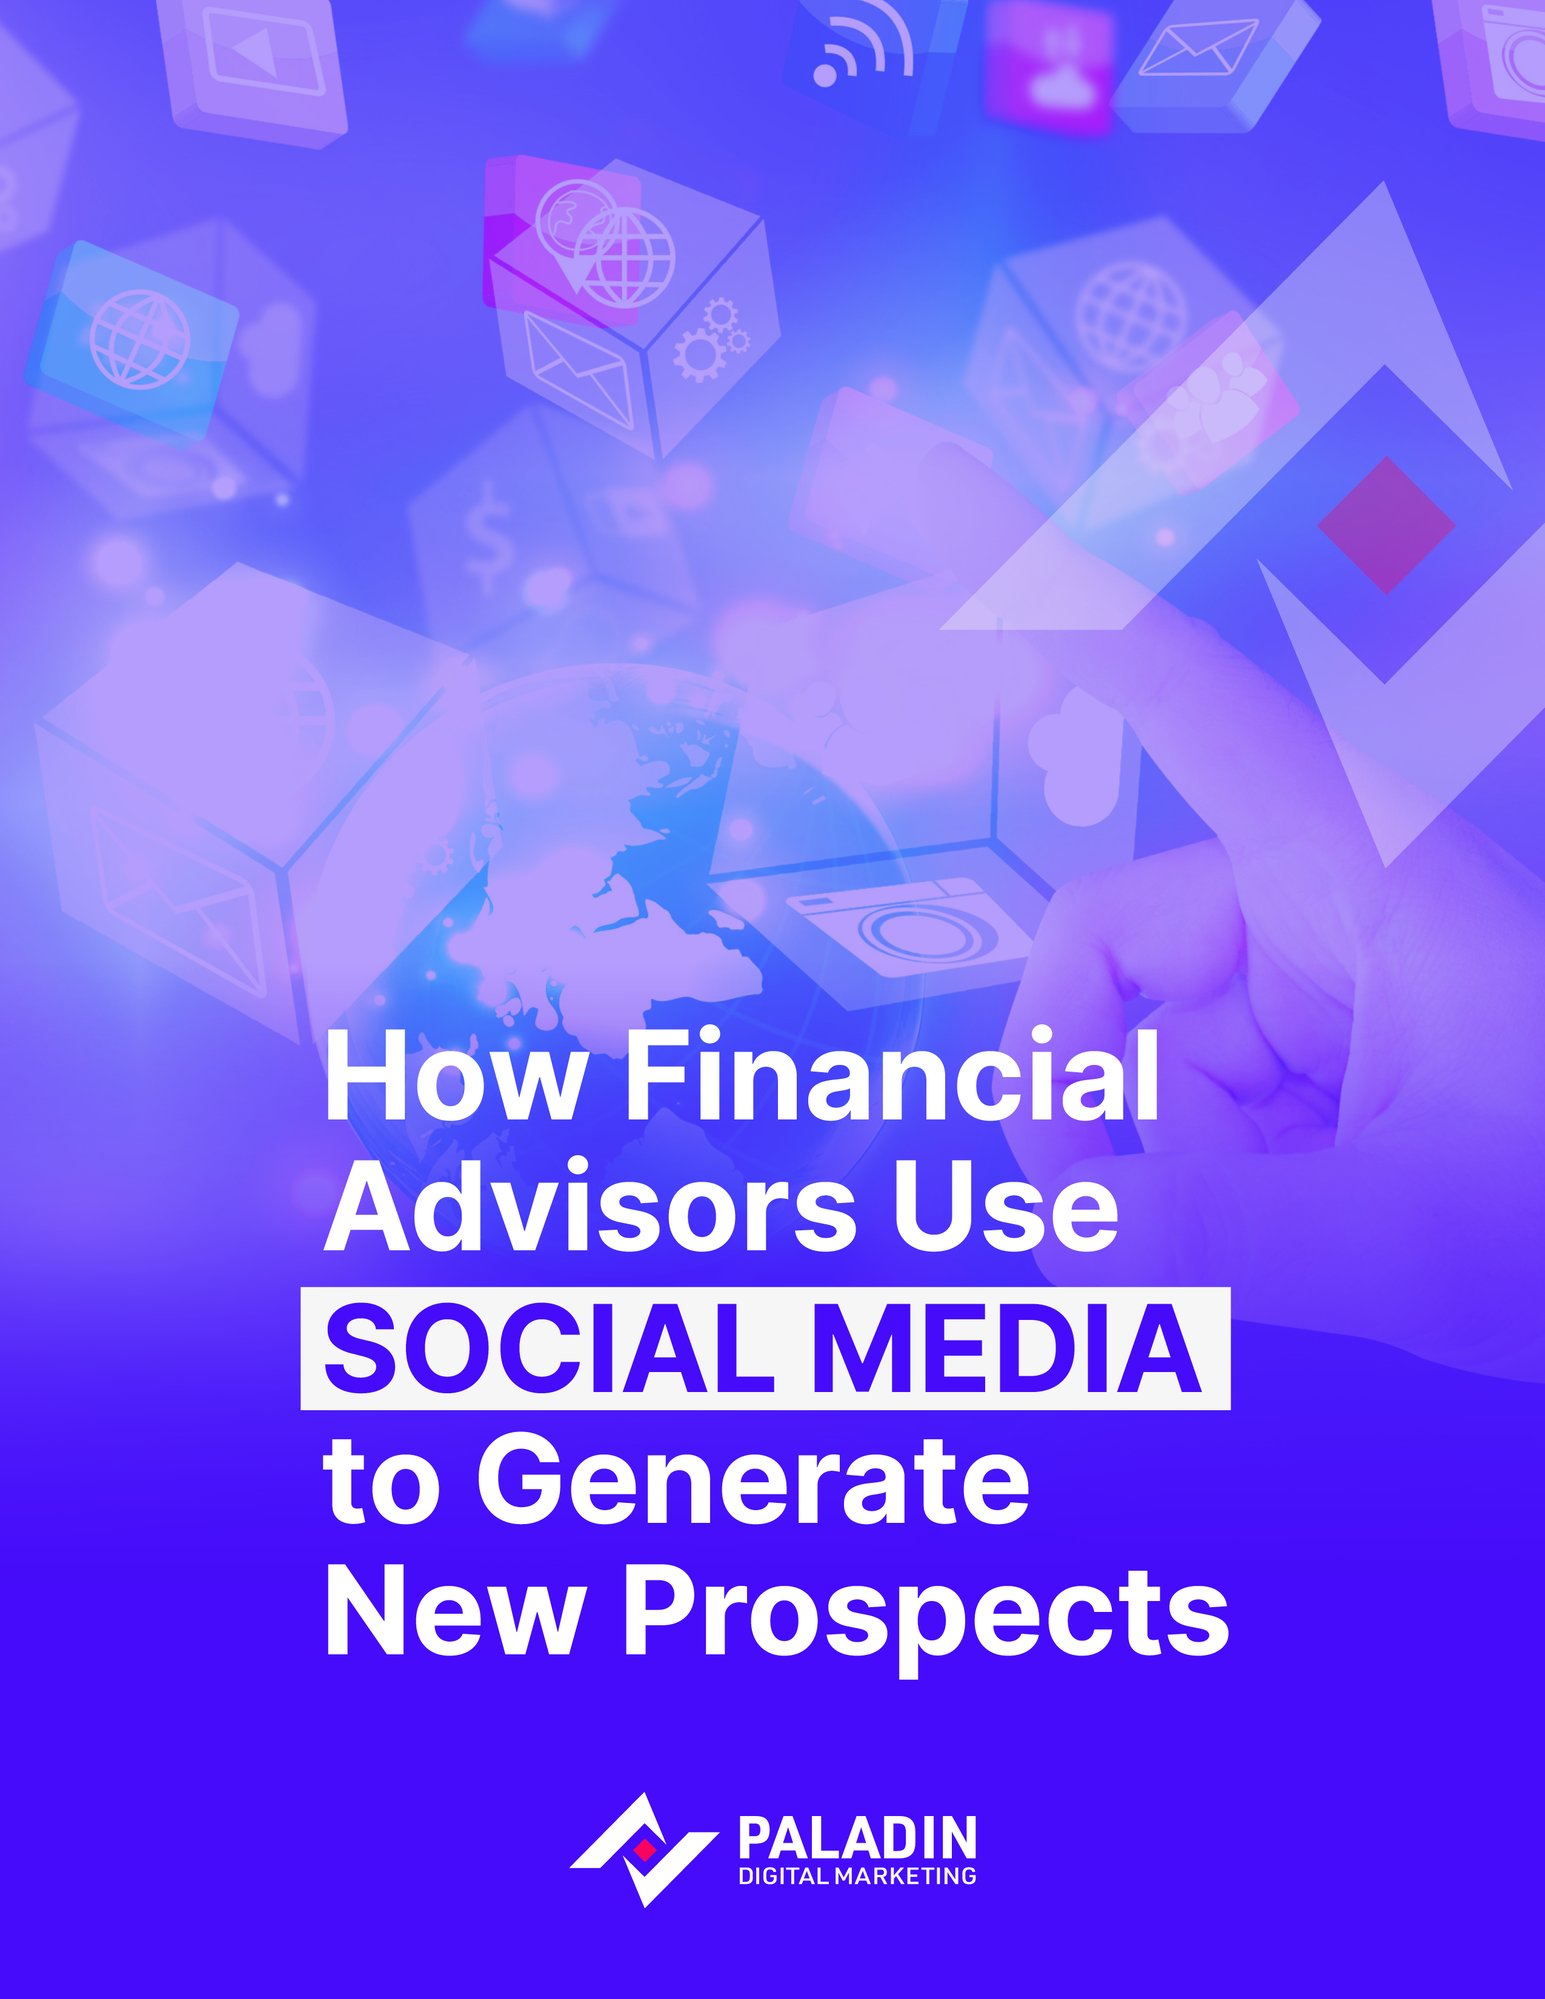 eBook - How Financial Advisors Use Social Media to Generate New Prospects_Cover